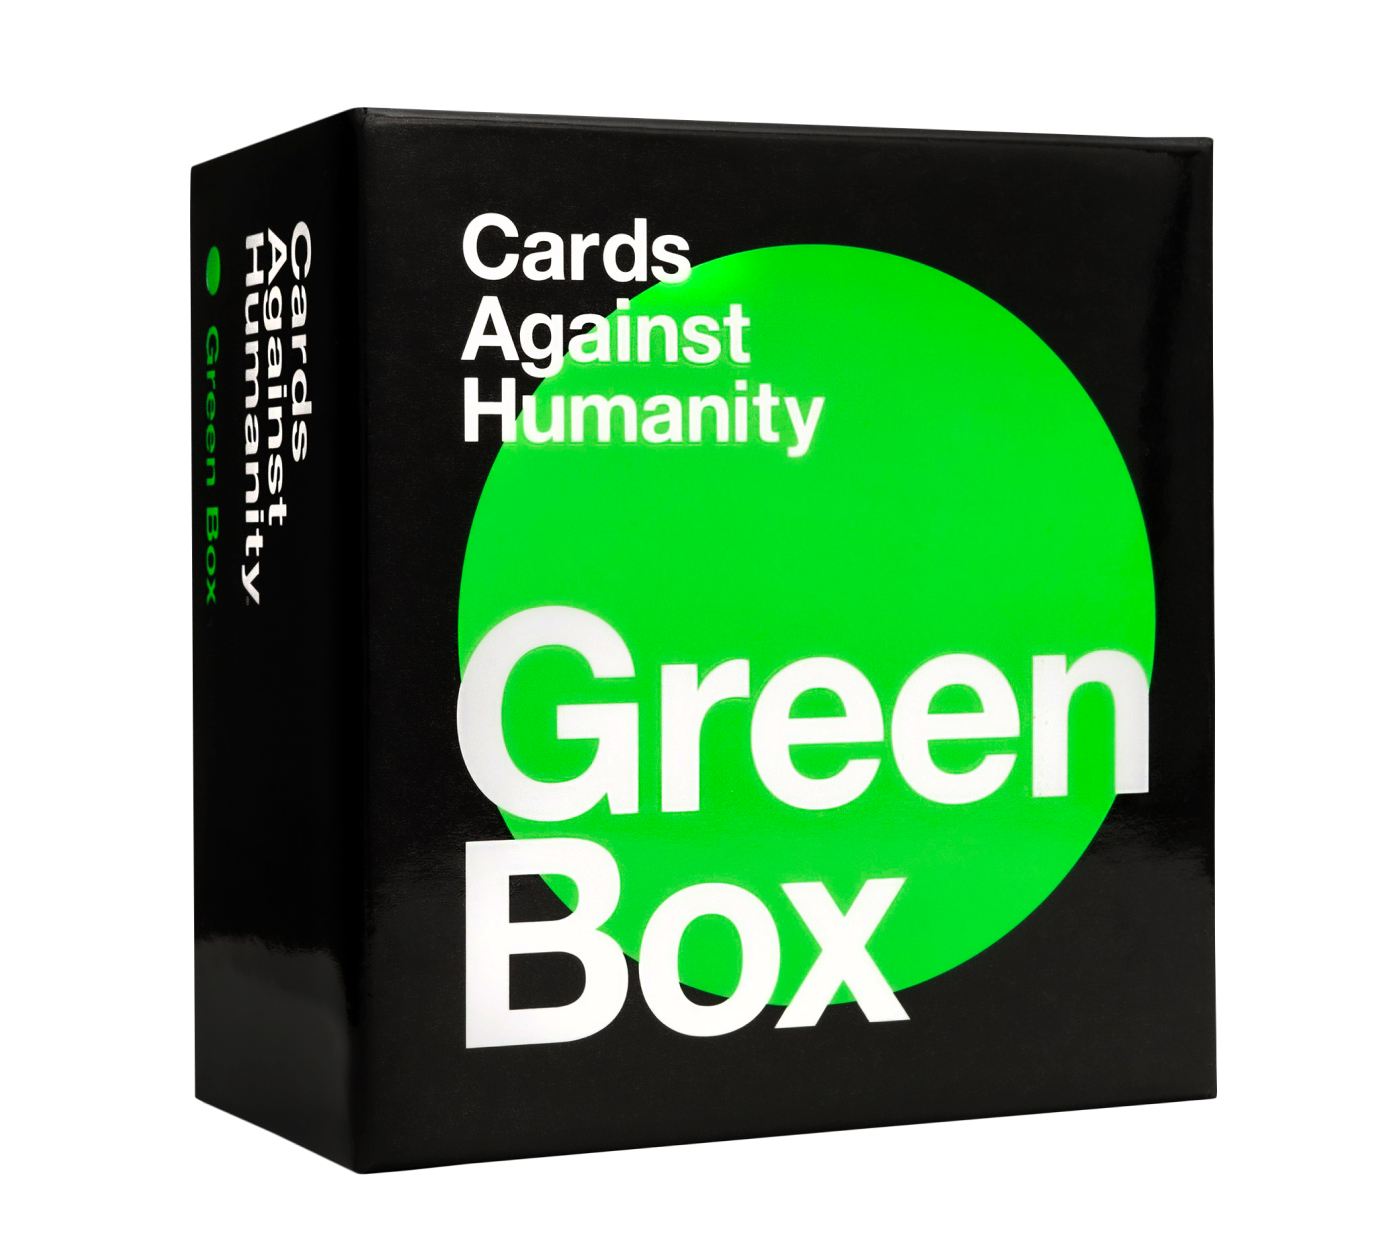 Cards Against Humanity NEW Free UK P&P GENUINE UK "Cards Against Humanity" Period Pack Expansion CAH 